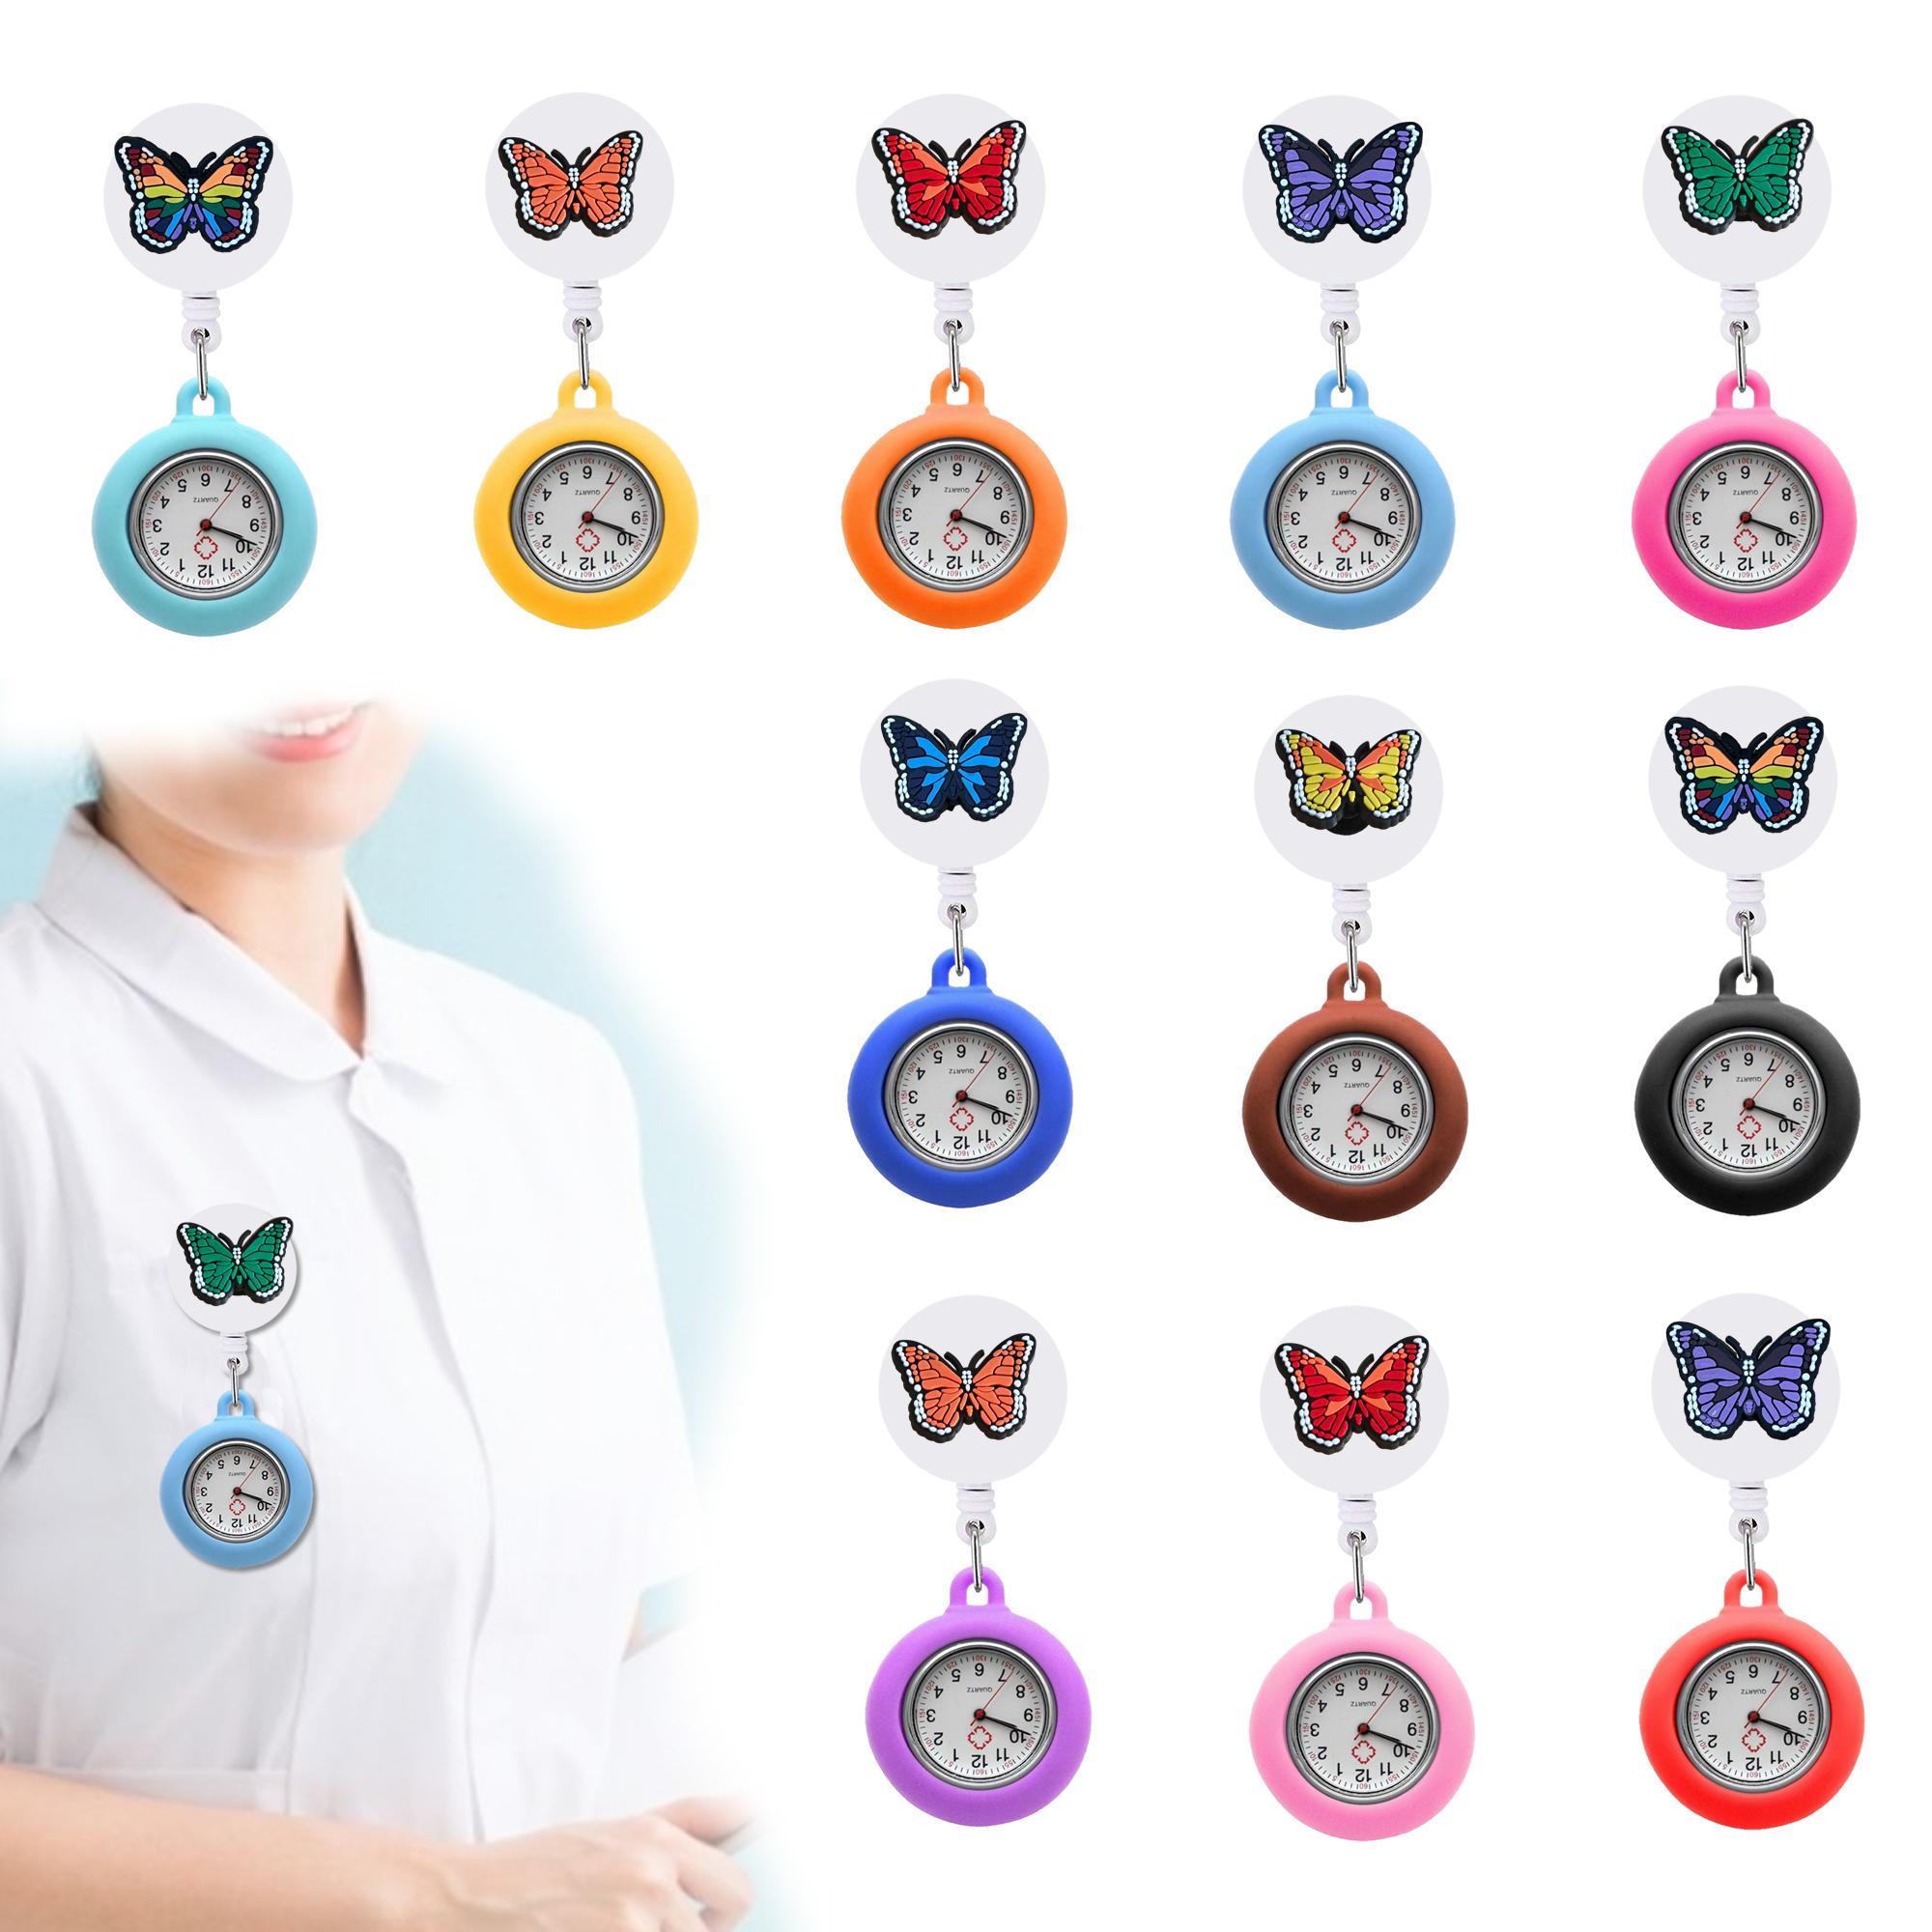 Charms Butterfly Clip Pocket Watches Fob Hang Medicine Clock Nurse Watch On Watche For With Sile Case Retractable Student Gifts Drop D Ottuh